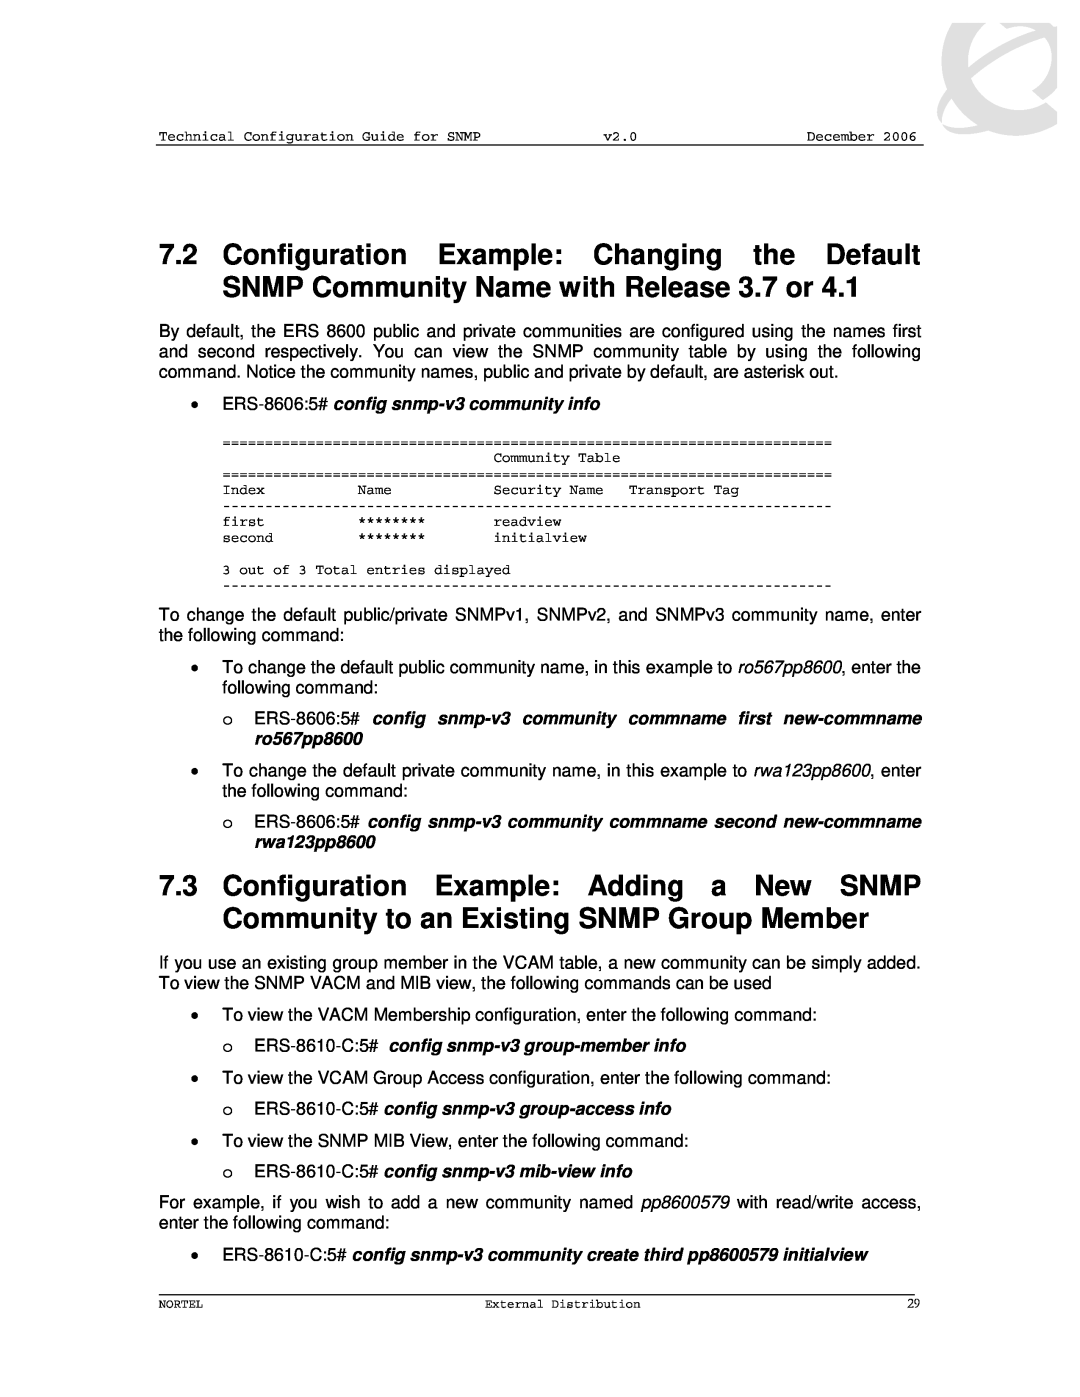 Nortel Networks 8600 manual Configuration Example Changing the Default SNMP Community Name with Release 3.7 or 